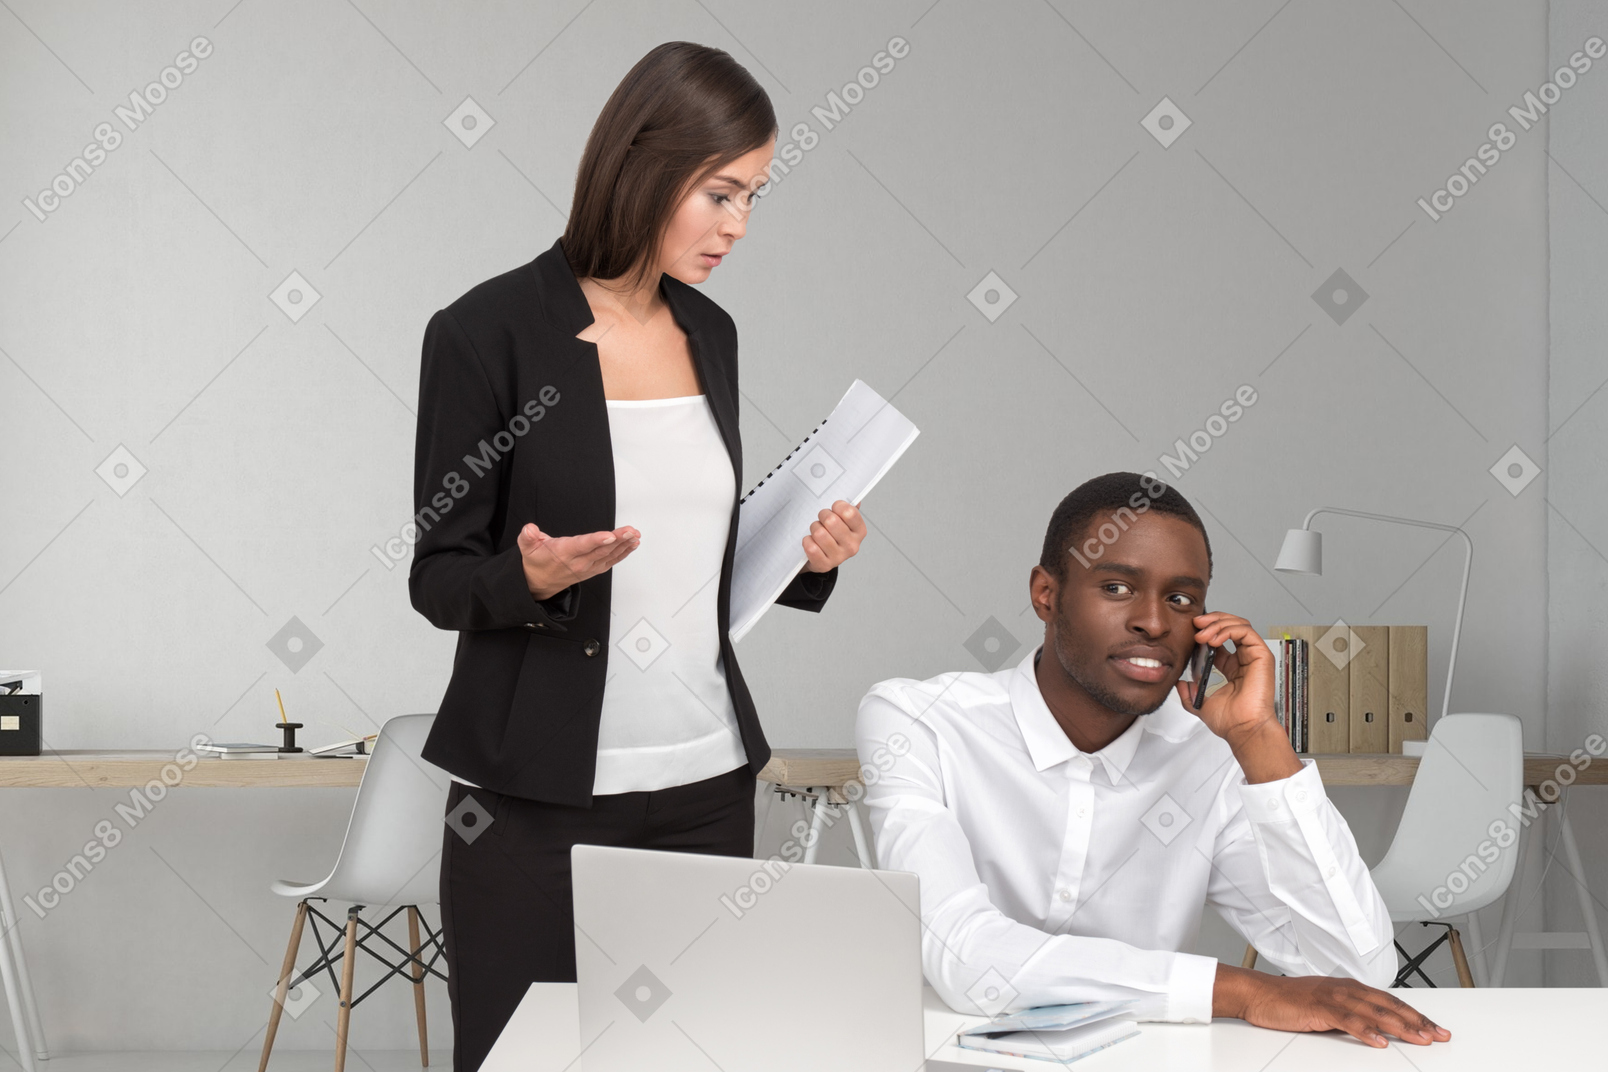 Confused female boss looking at employee talking on phone